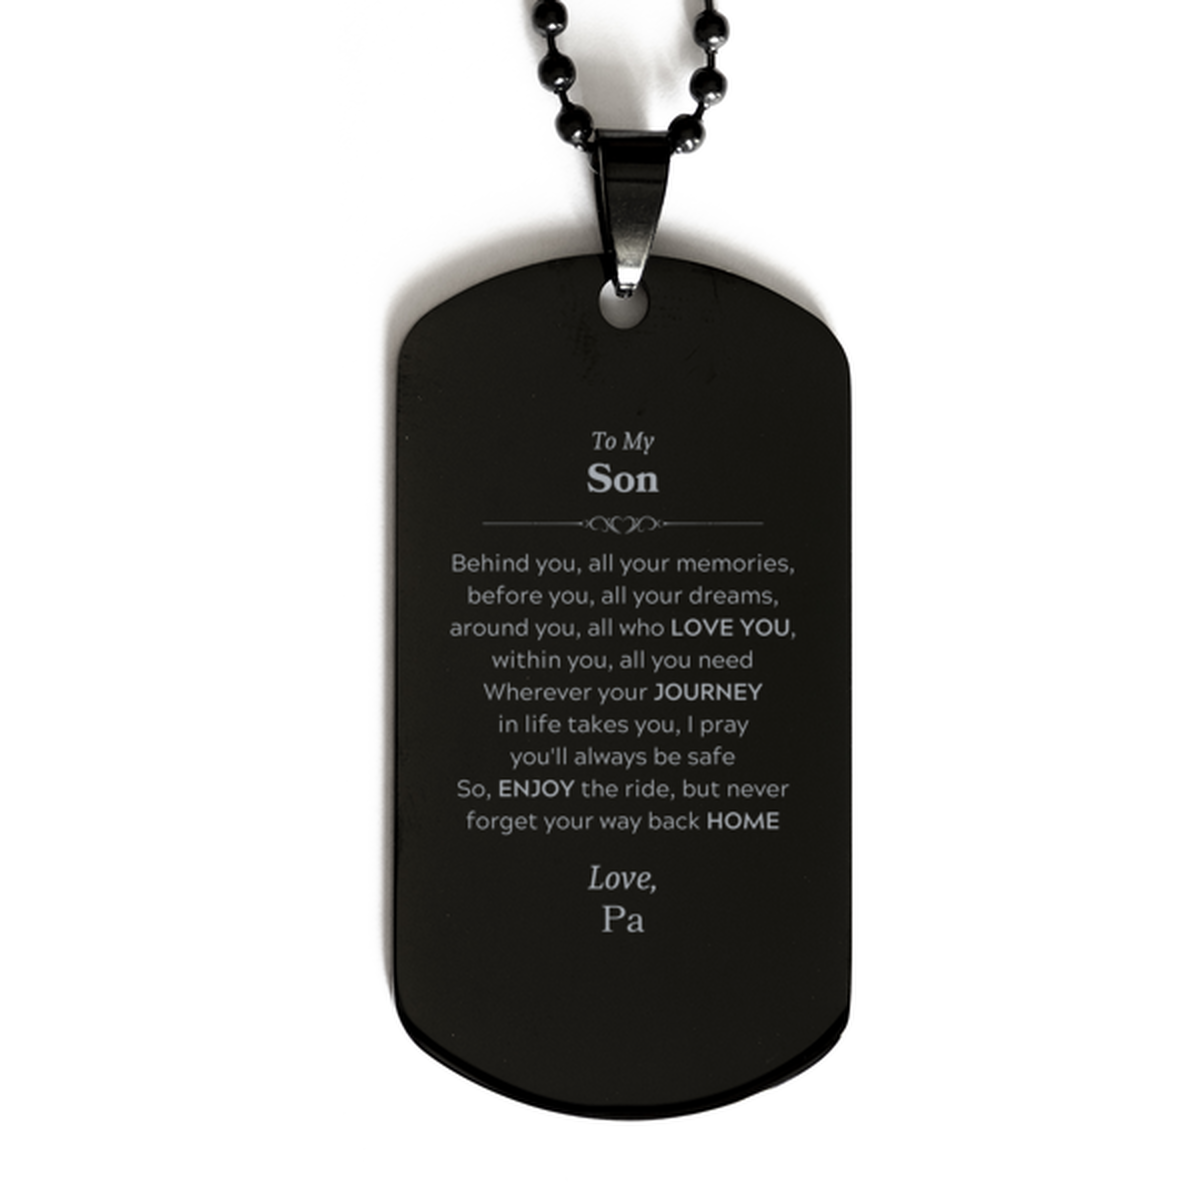 To My Son Graduation Gifts from Pa, Son Black Dog Tag Christmas Birthday Gifts for Son Behind you, all your memories, before you, all your dreams. Love, Pa